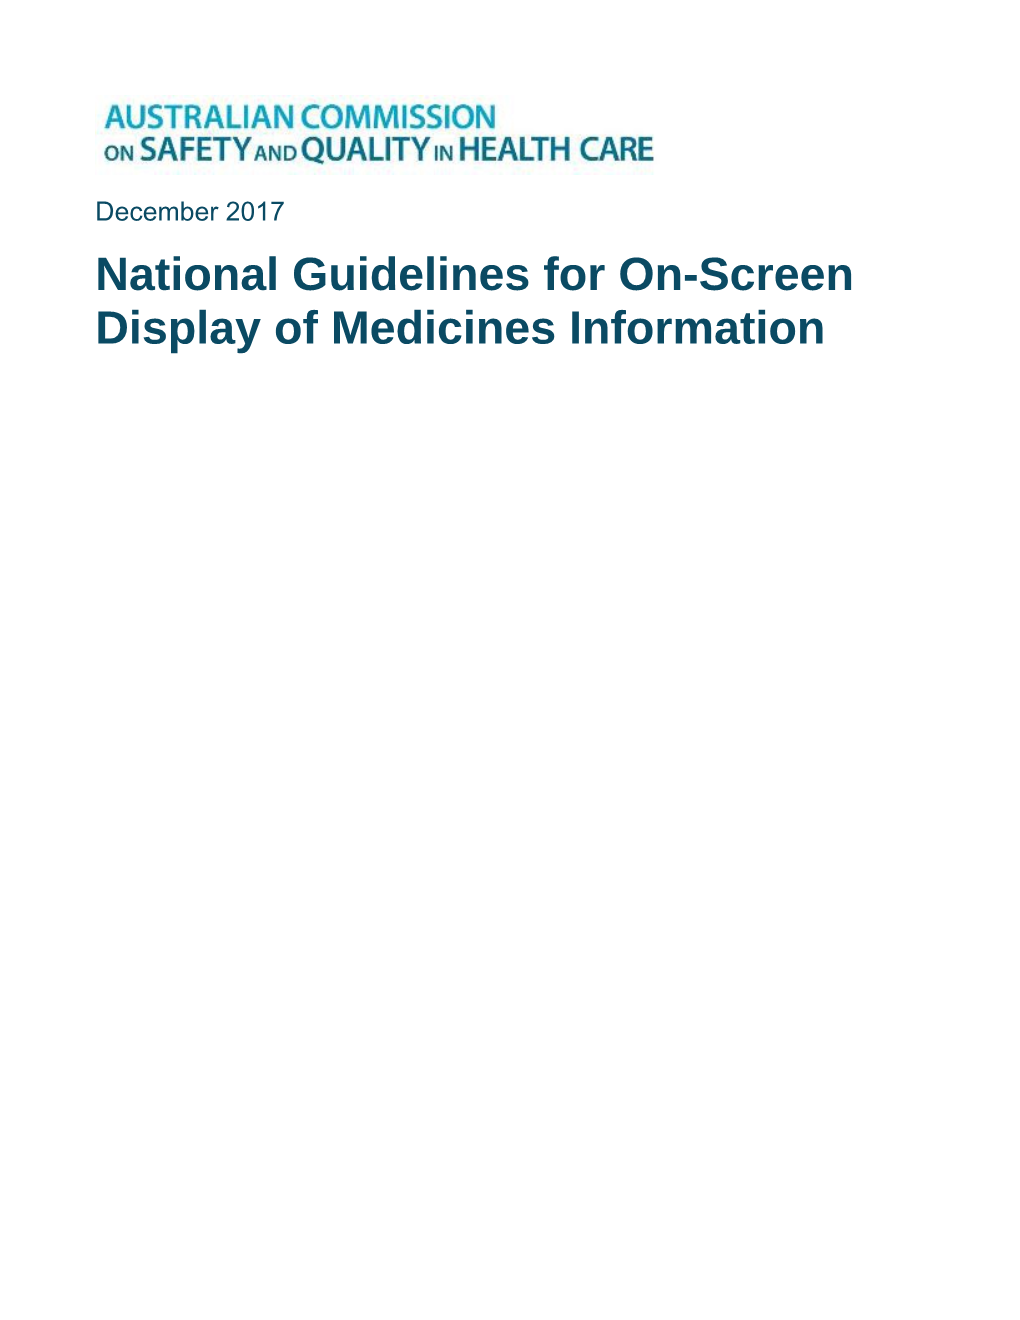 National Guidelines for On-Screen Display of Medicines Information